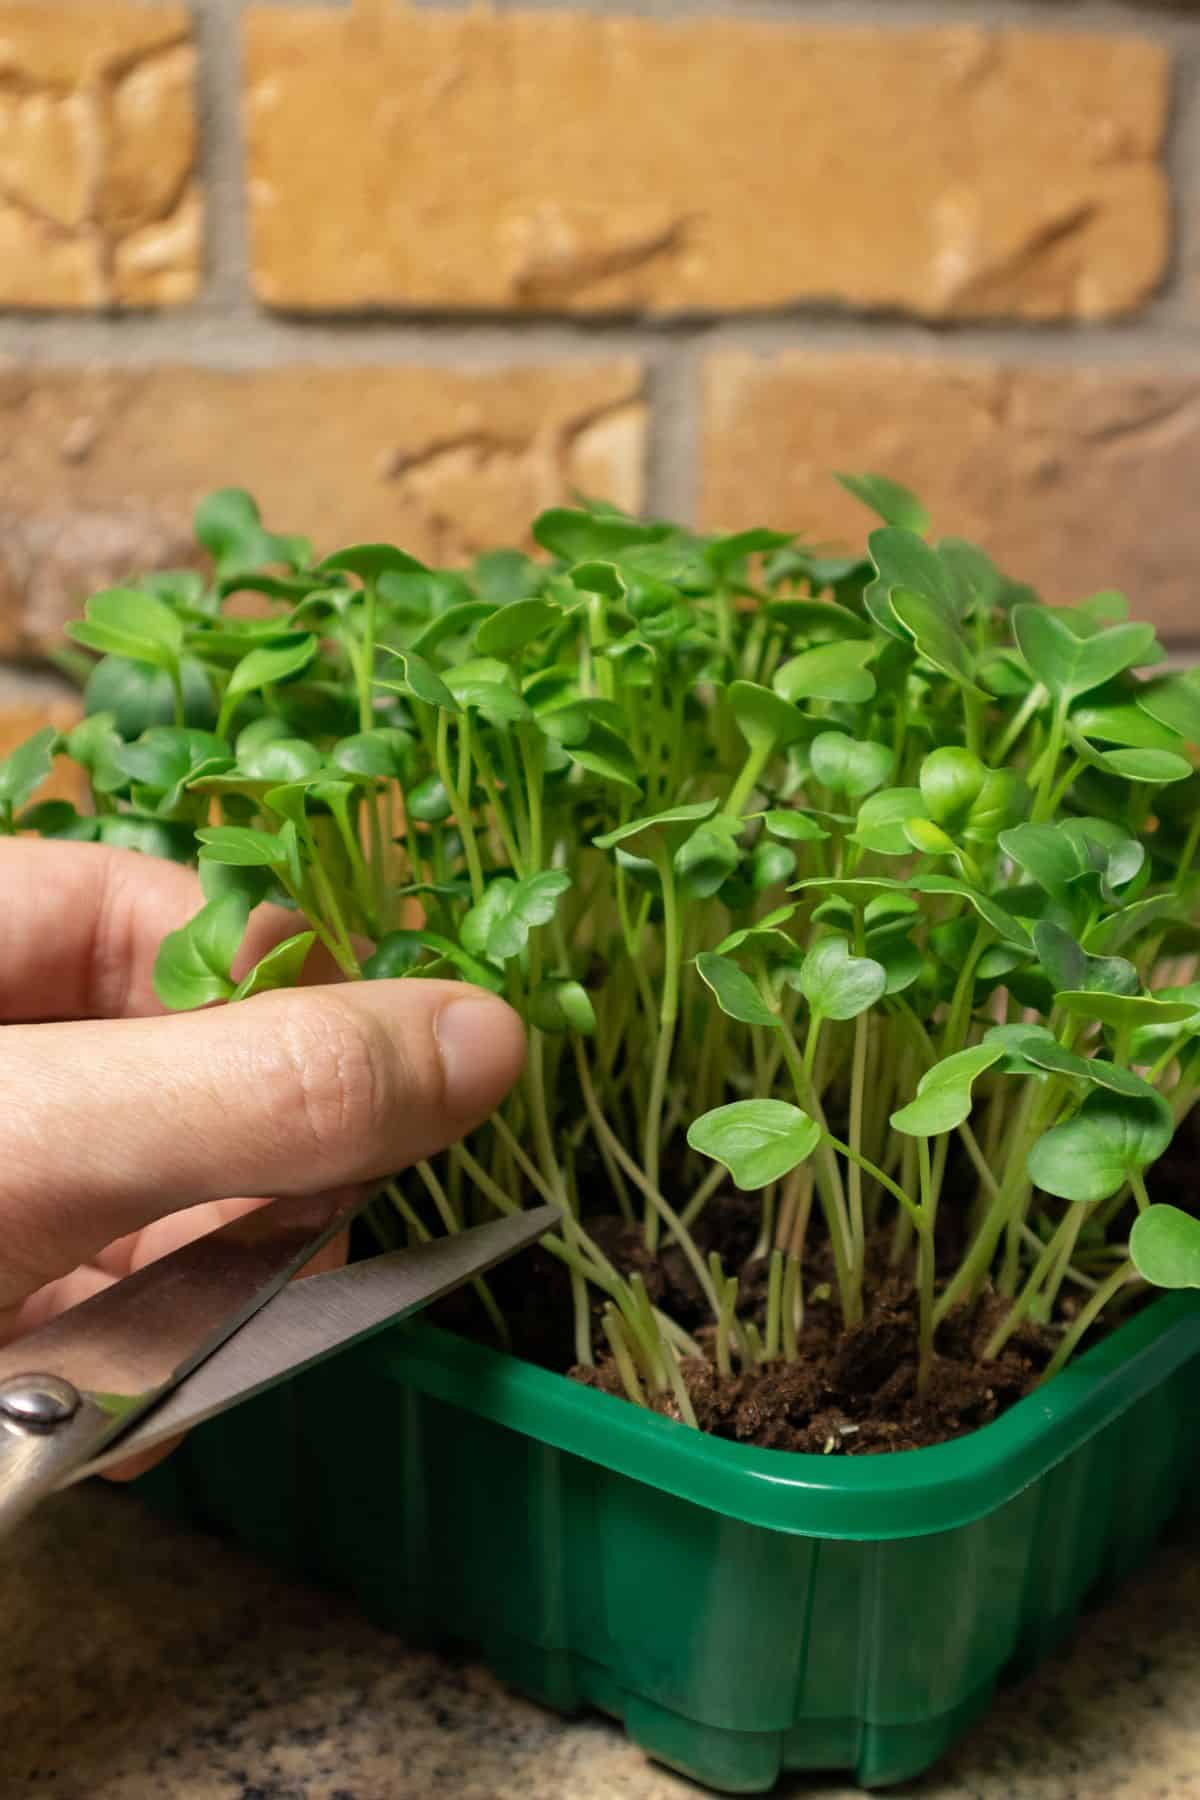 a person clipping microgreens from the container.